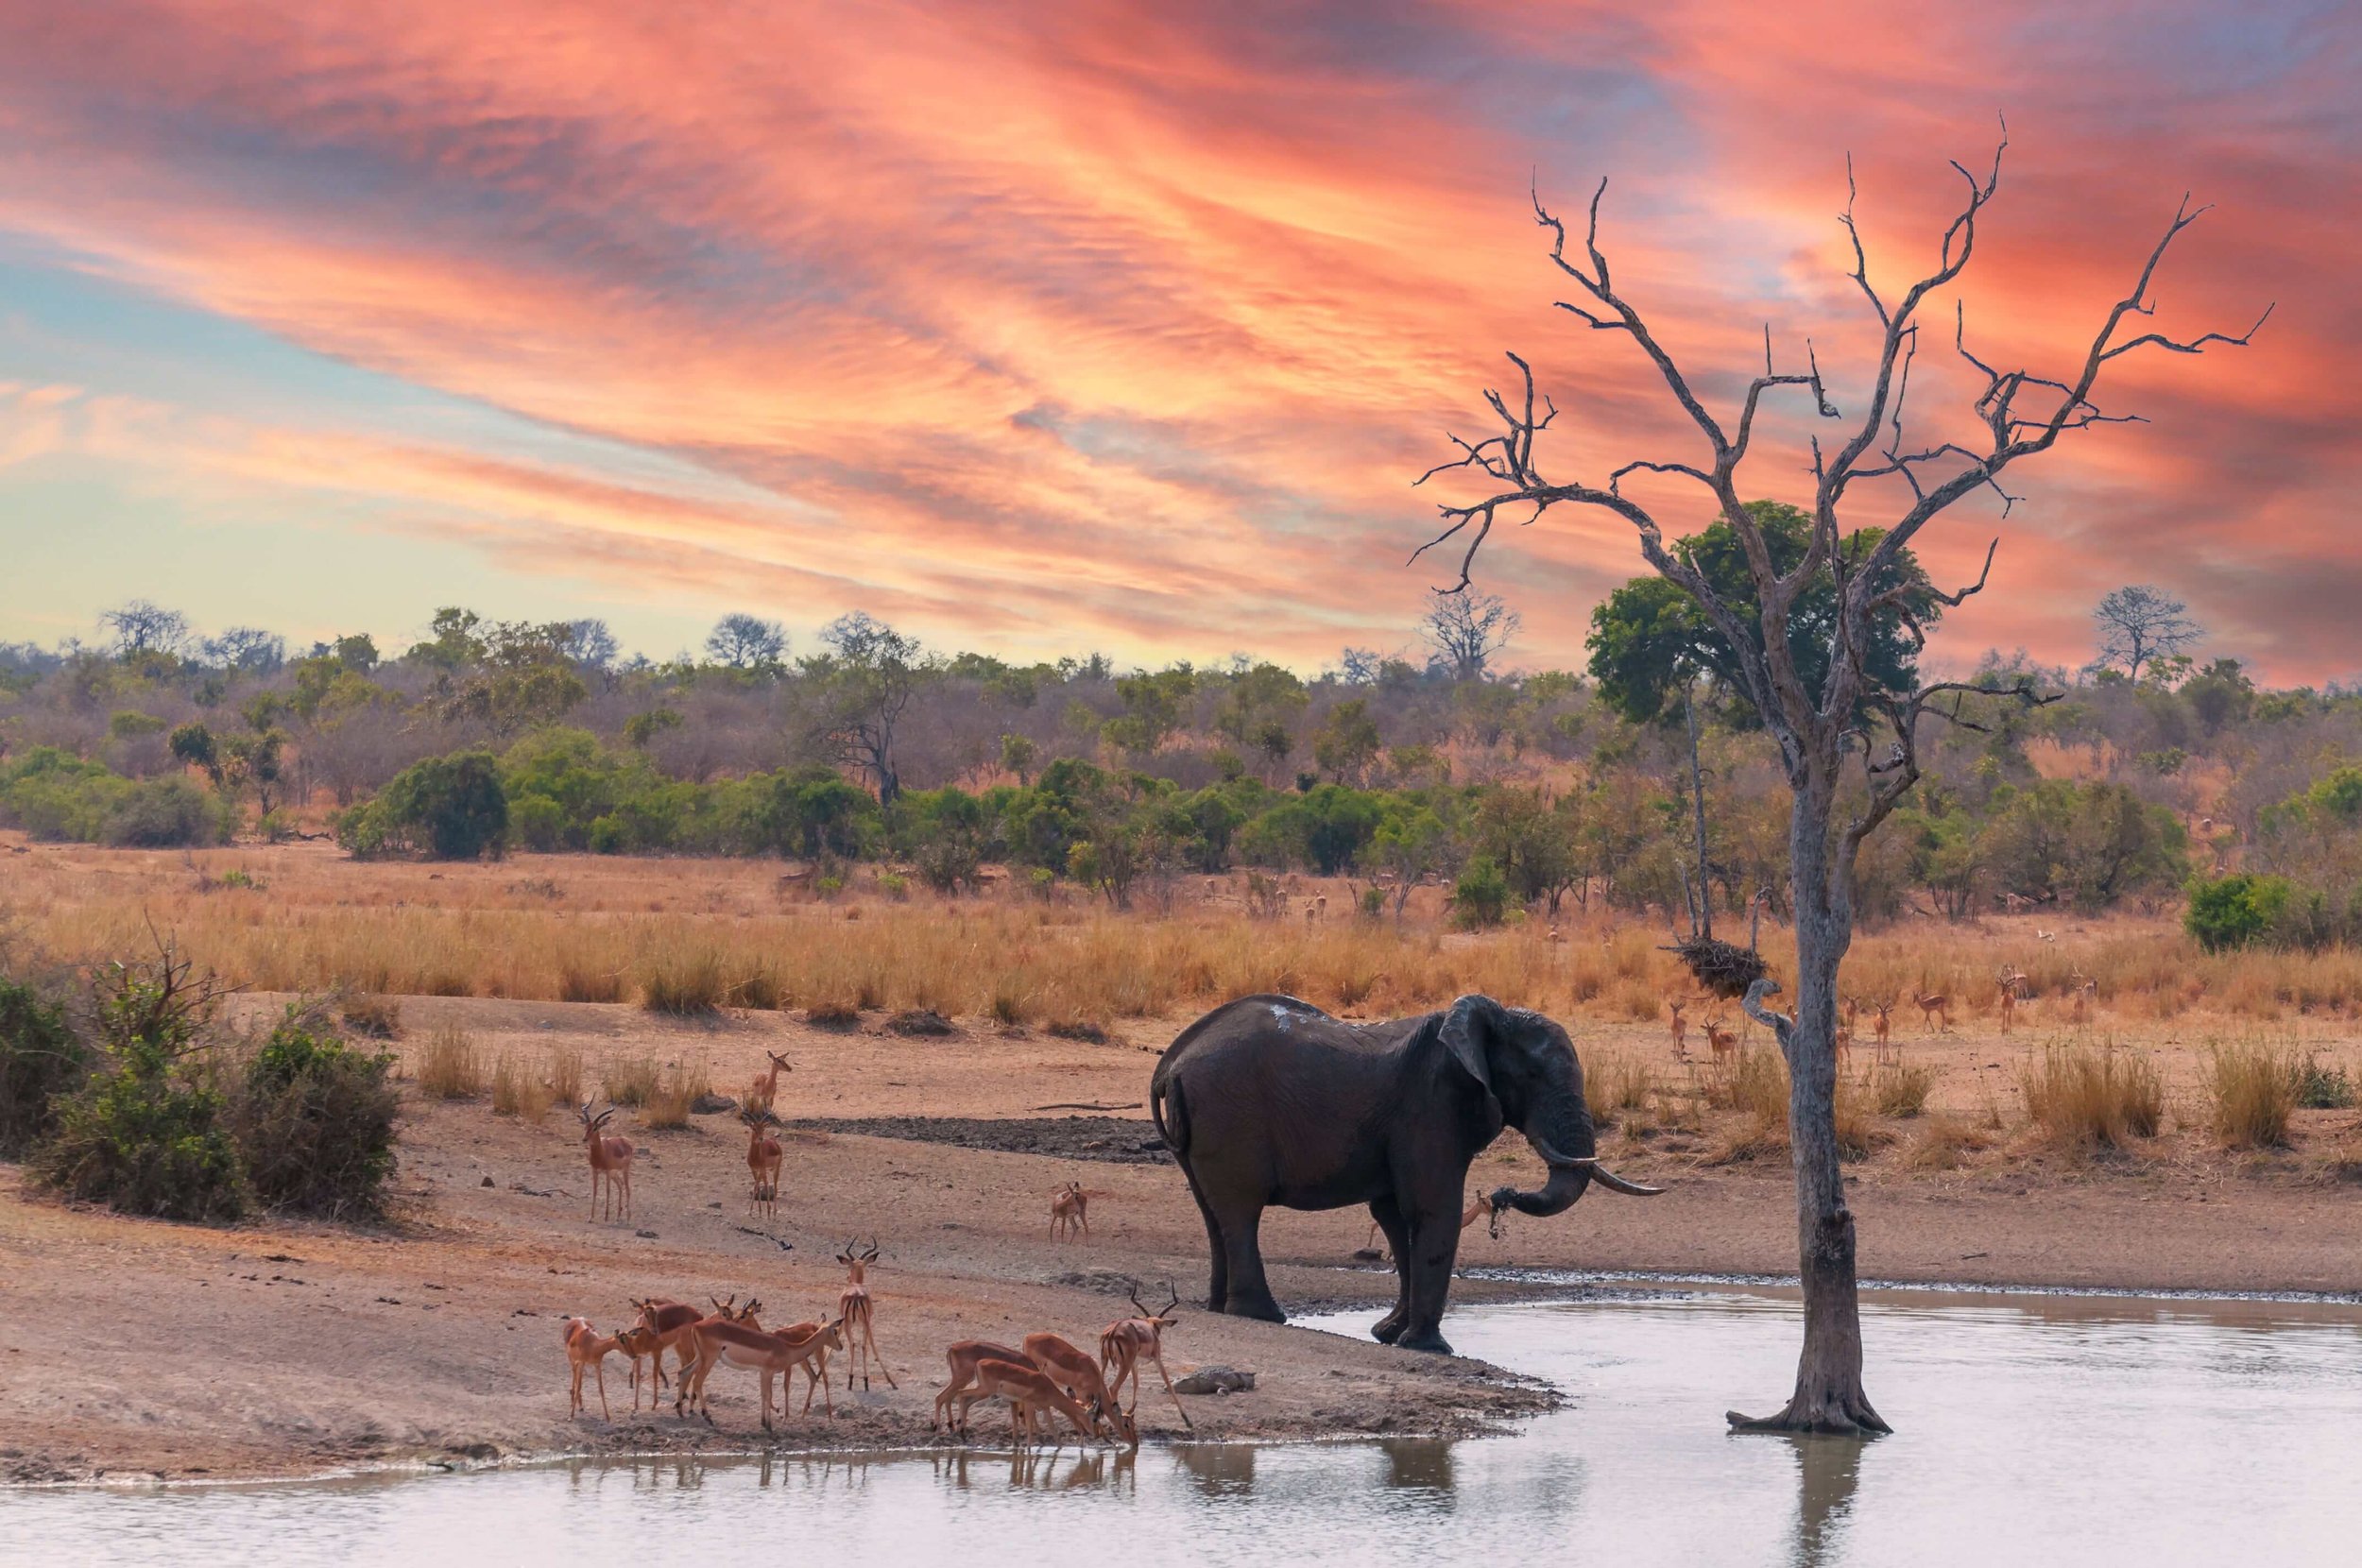 When Is The Best Time To Go On An African Safari?